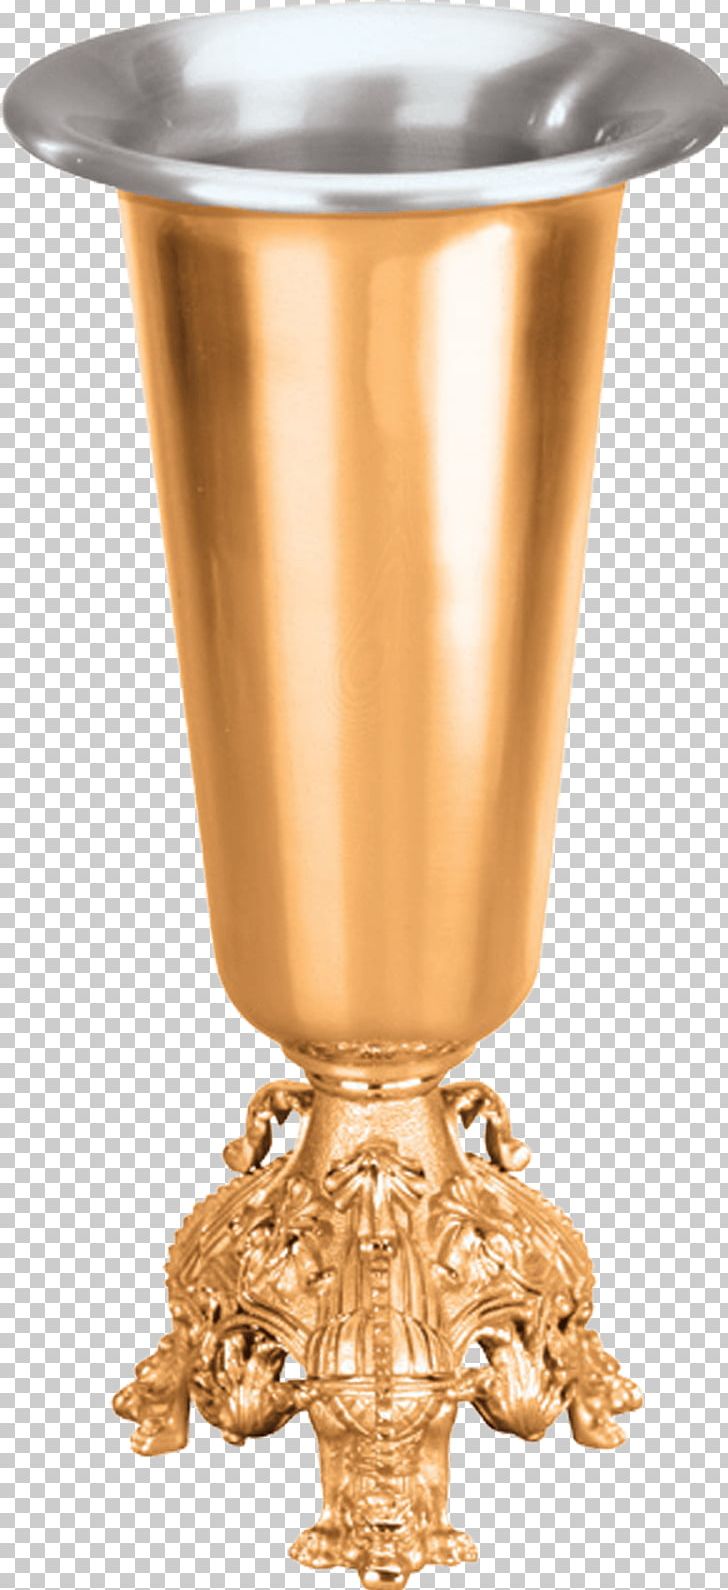 Vase Tableware Urn Chalice Artifact PNG, Clipart, Altar, Artifact, Chalice, Cup, Drinkware Free PNG Download